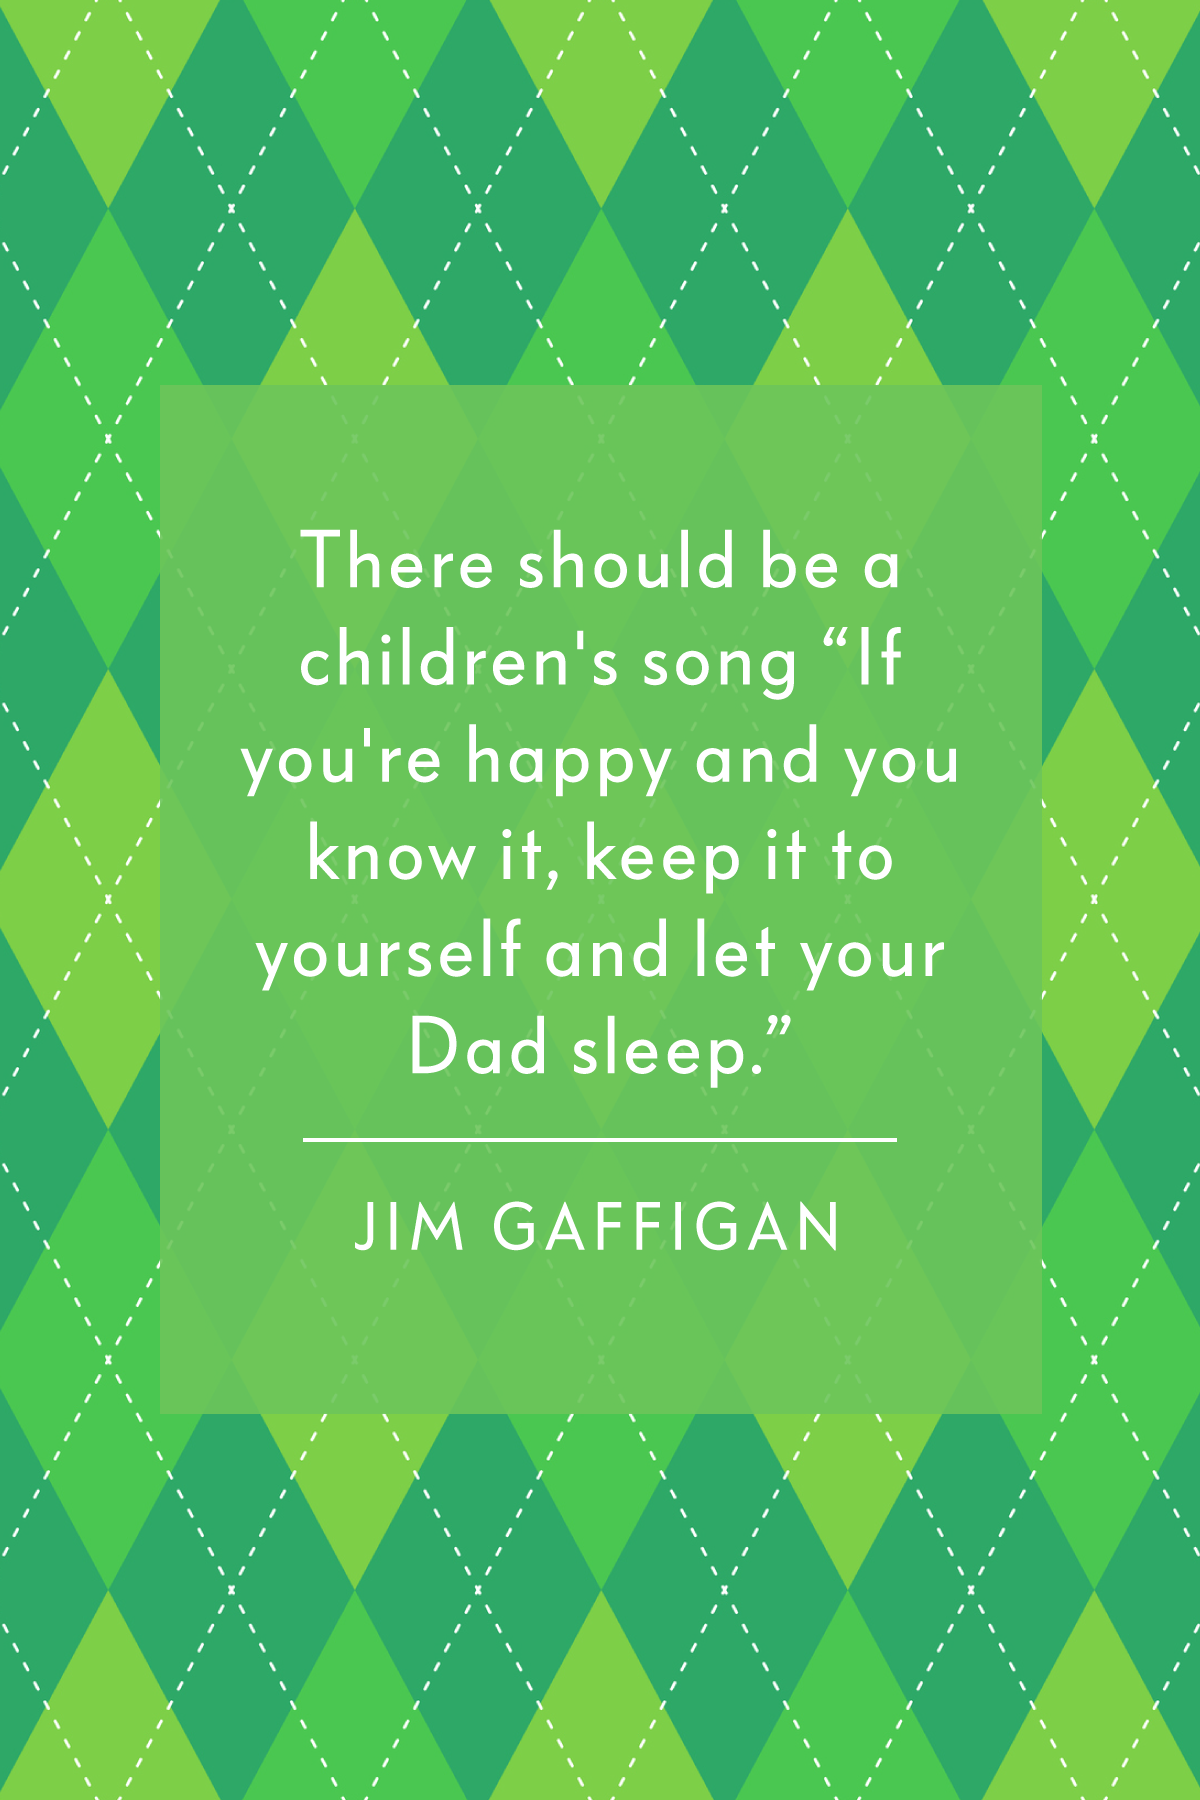 Download 60 Best Father S Day Quotes 2021 Inspiring Sayings For Dad